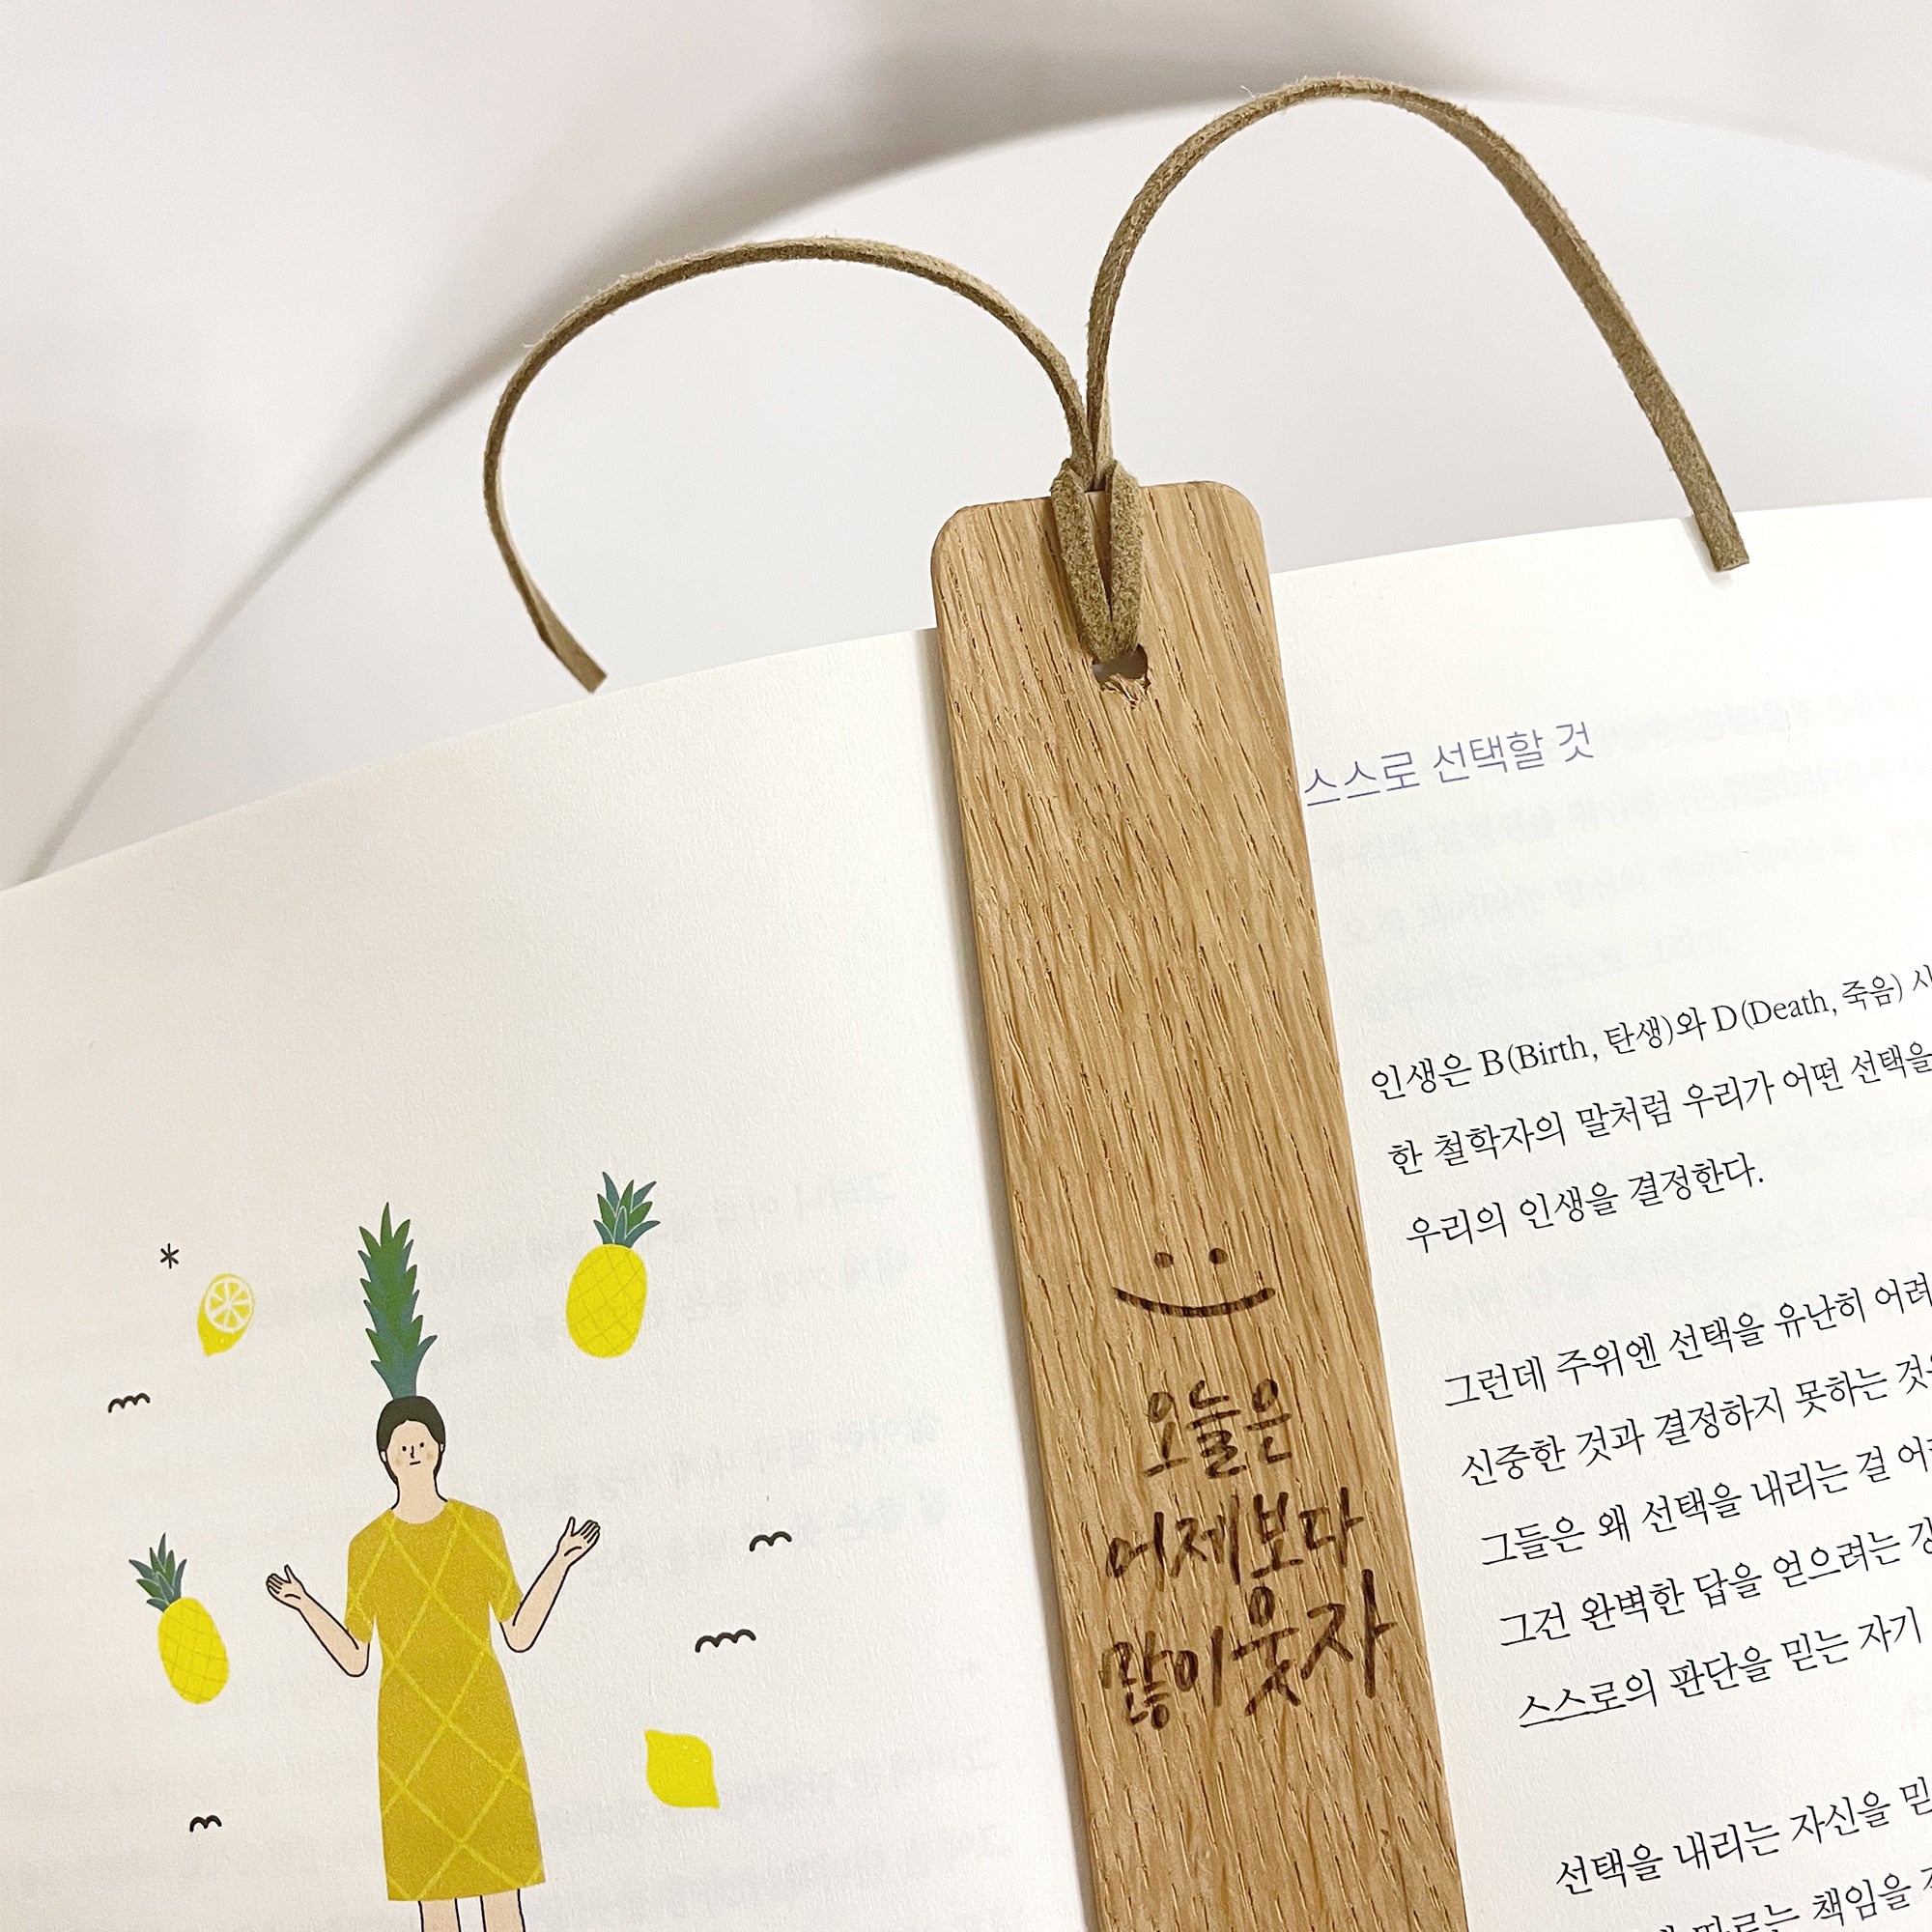 Handmade wooden bookmark with a simple smiling face illustration and Korean calligraphy, marking a page in a book adorned with pineapple graphics—a unique personalized gift.